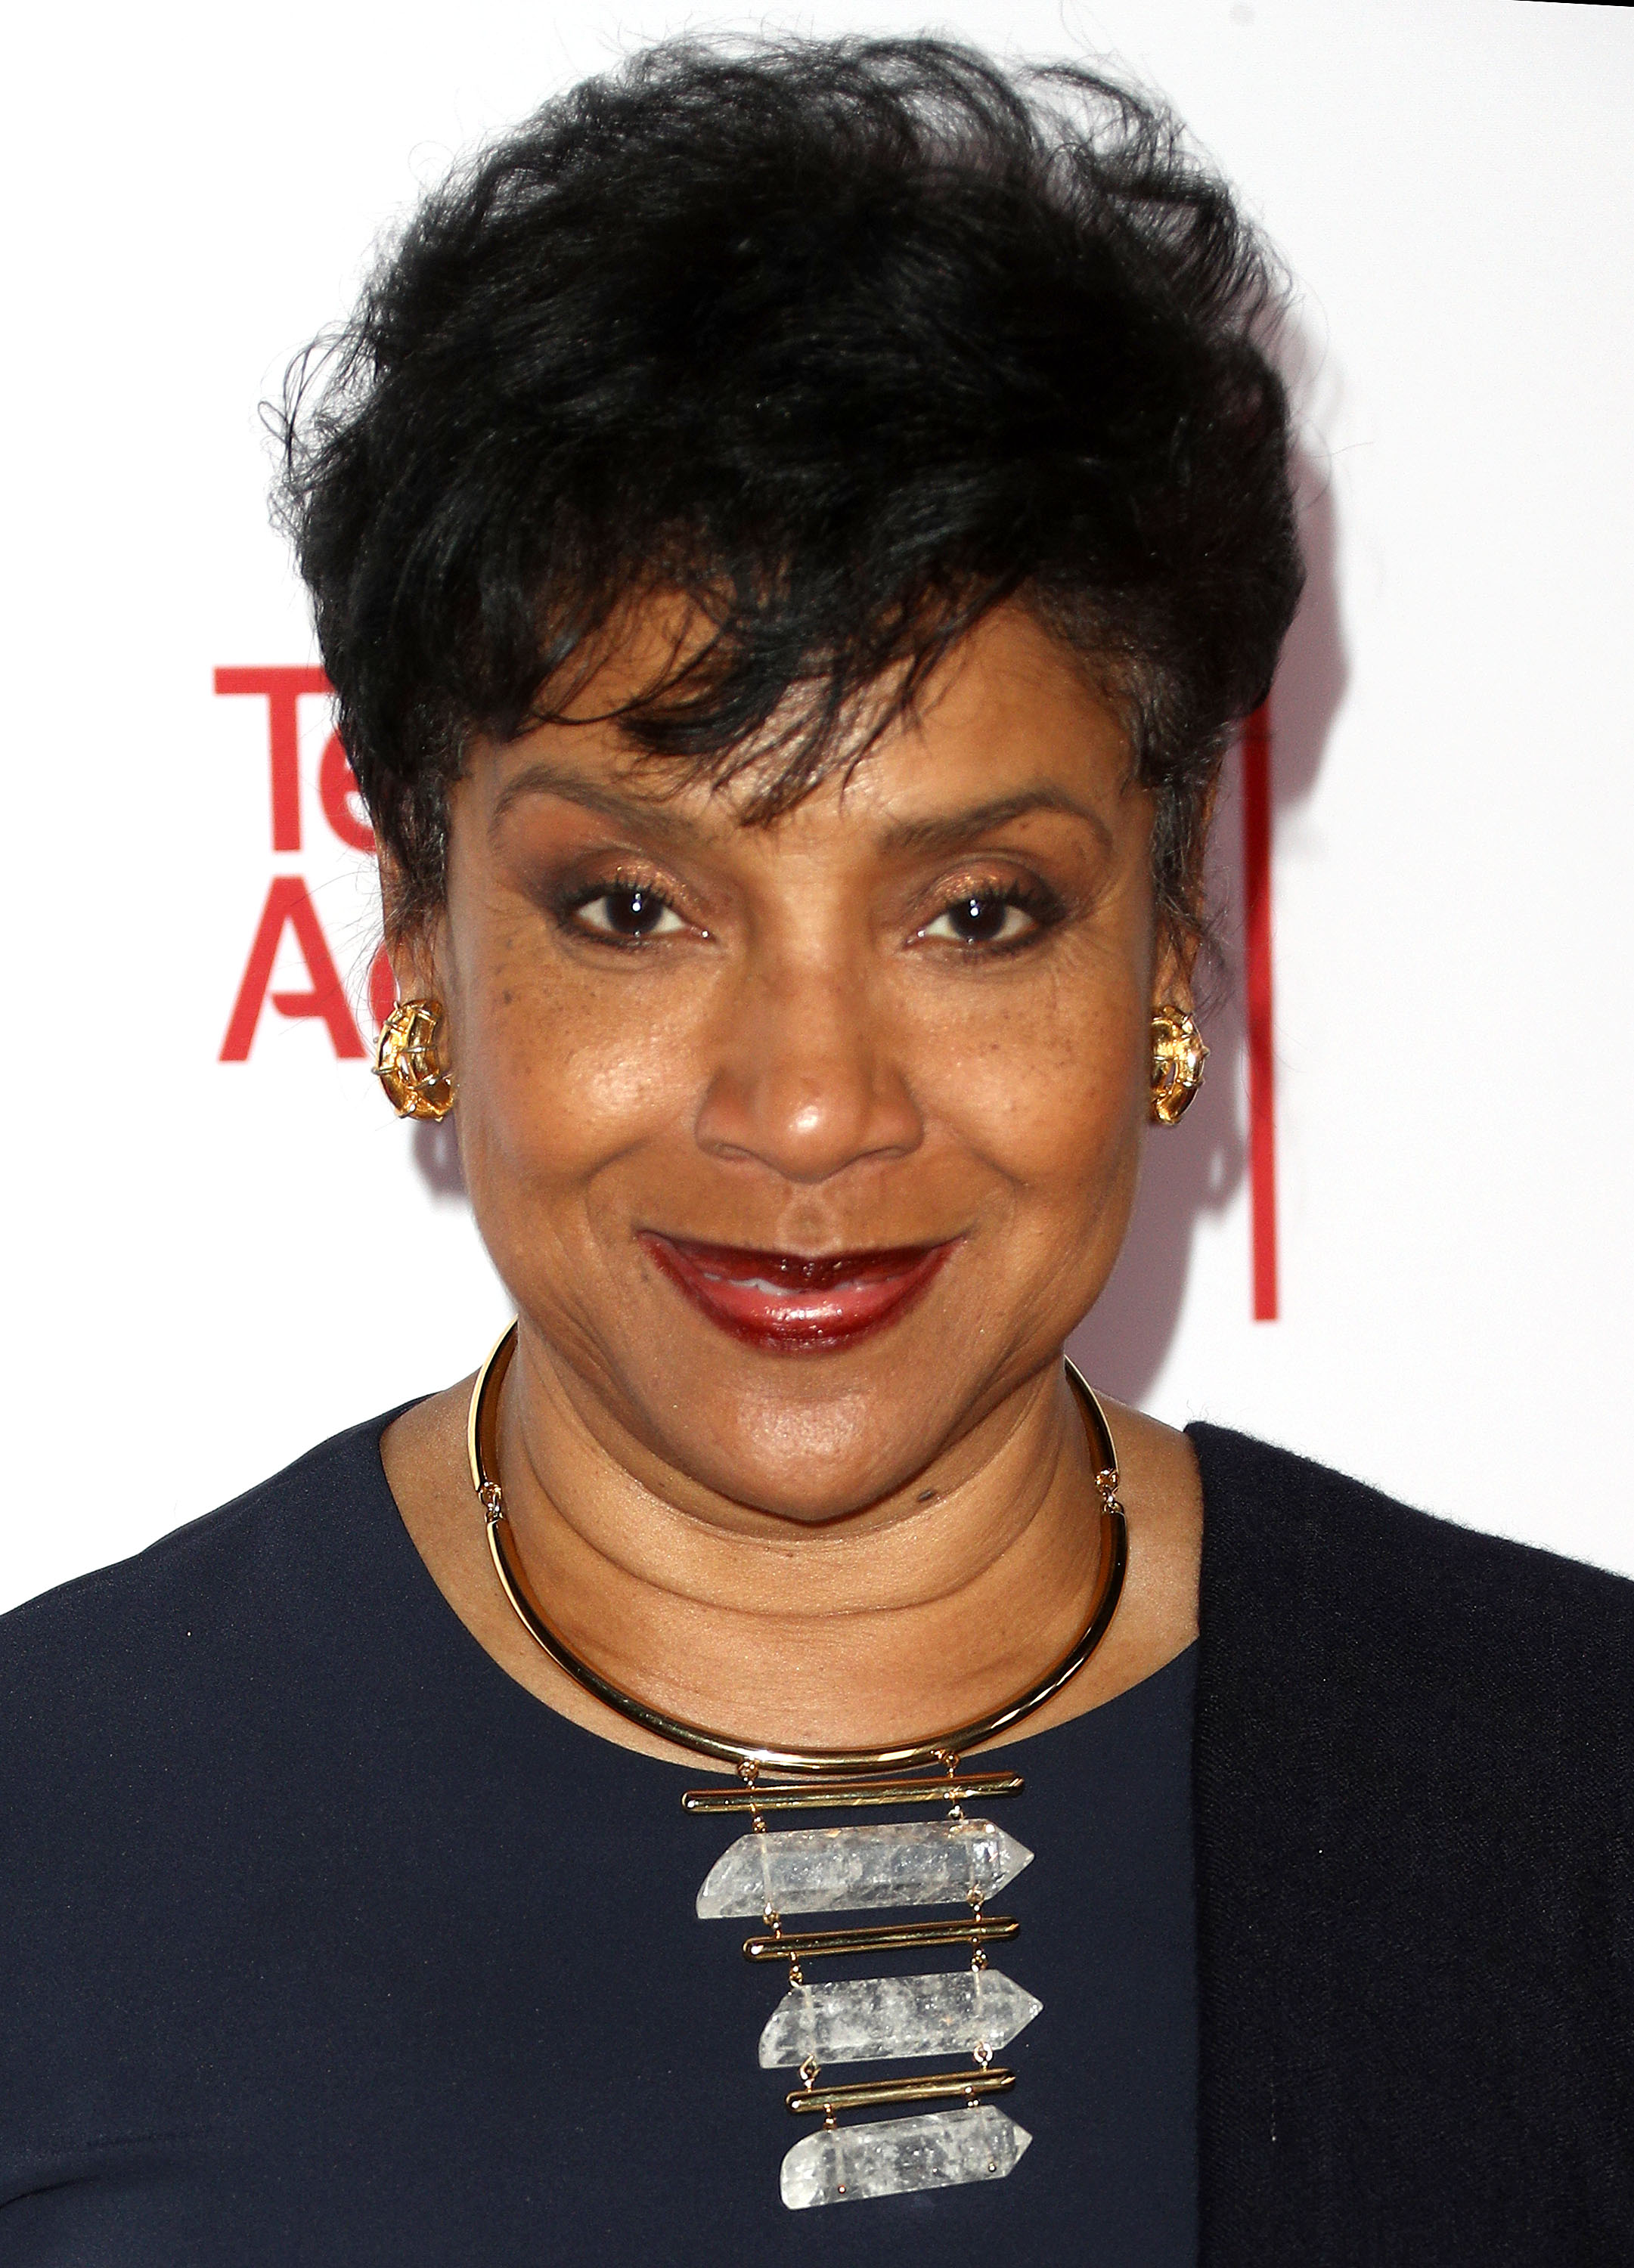 Phylicia rashad says she 'fully supports survivors of sexual assault&a...